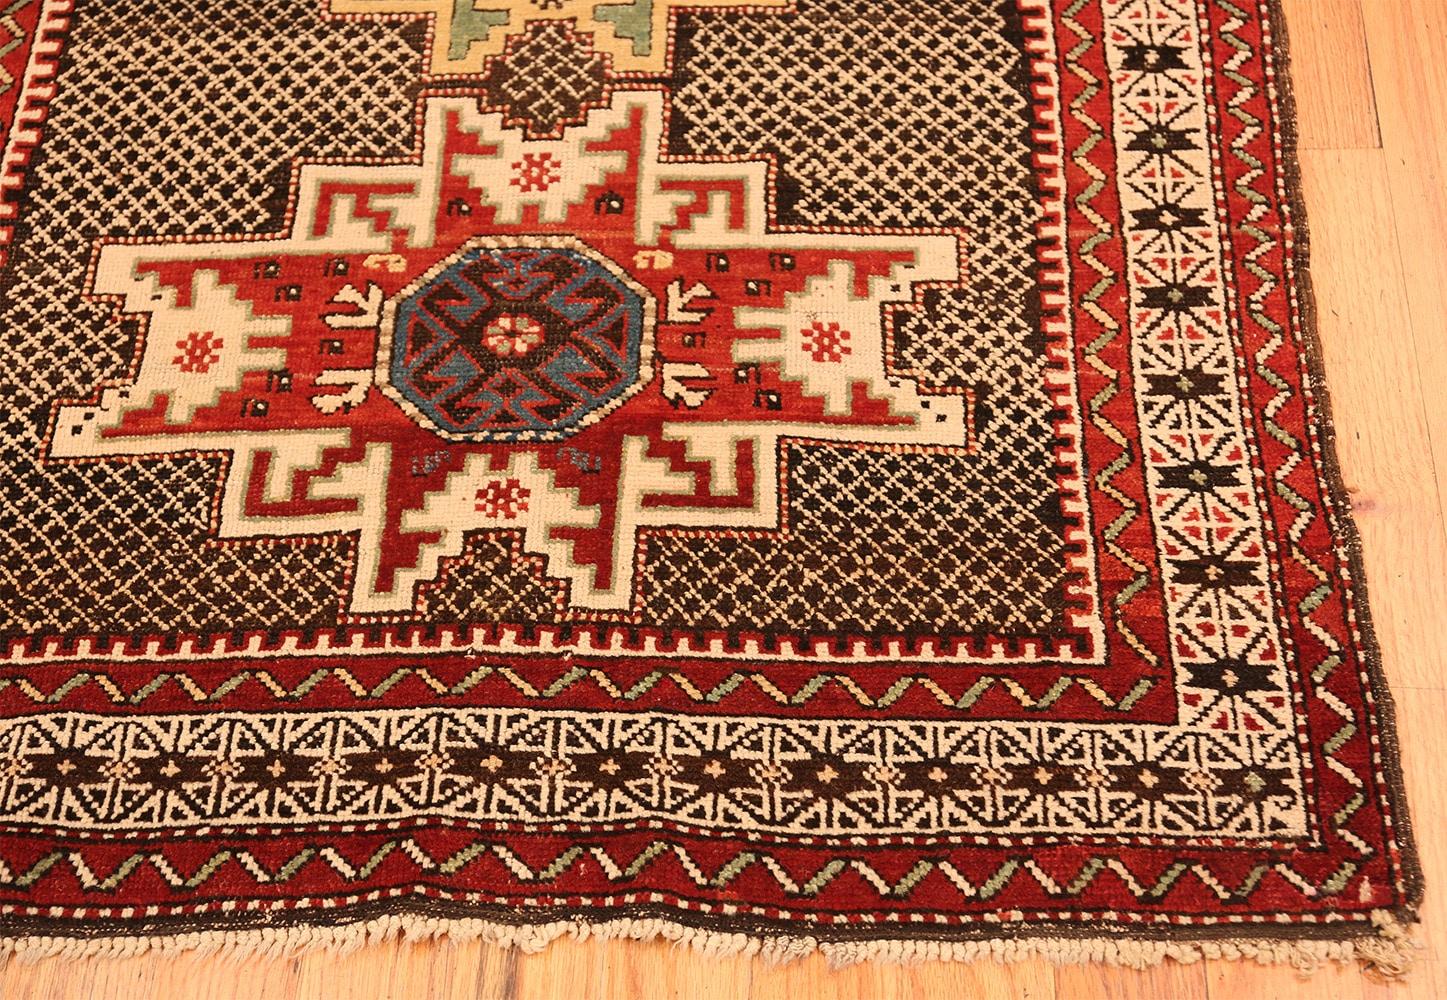 Hand-Knotted Small Tribal Antique Caucasian Kuba Rug. Size: 3 ft 6 in x 5 ft 6 in